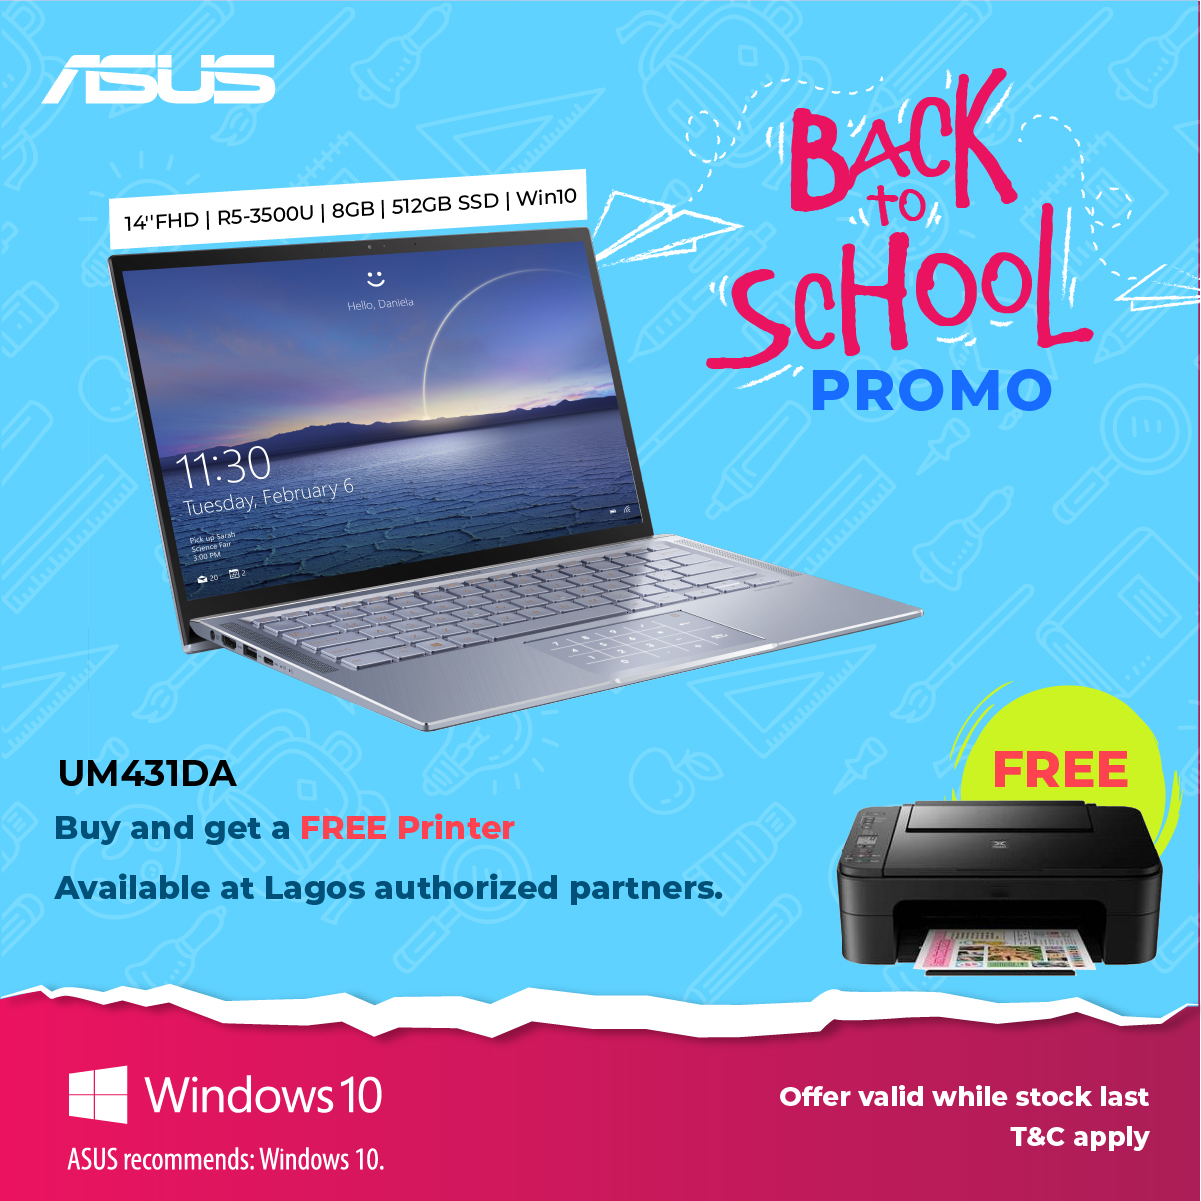 ASUS launches 2020 Back to School Promotion Free wireless printers